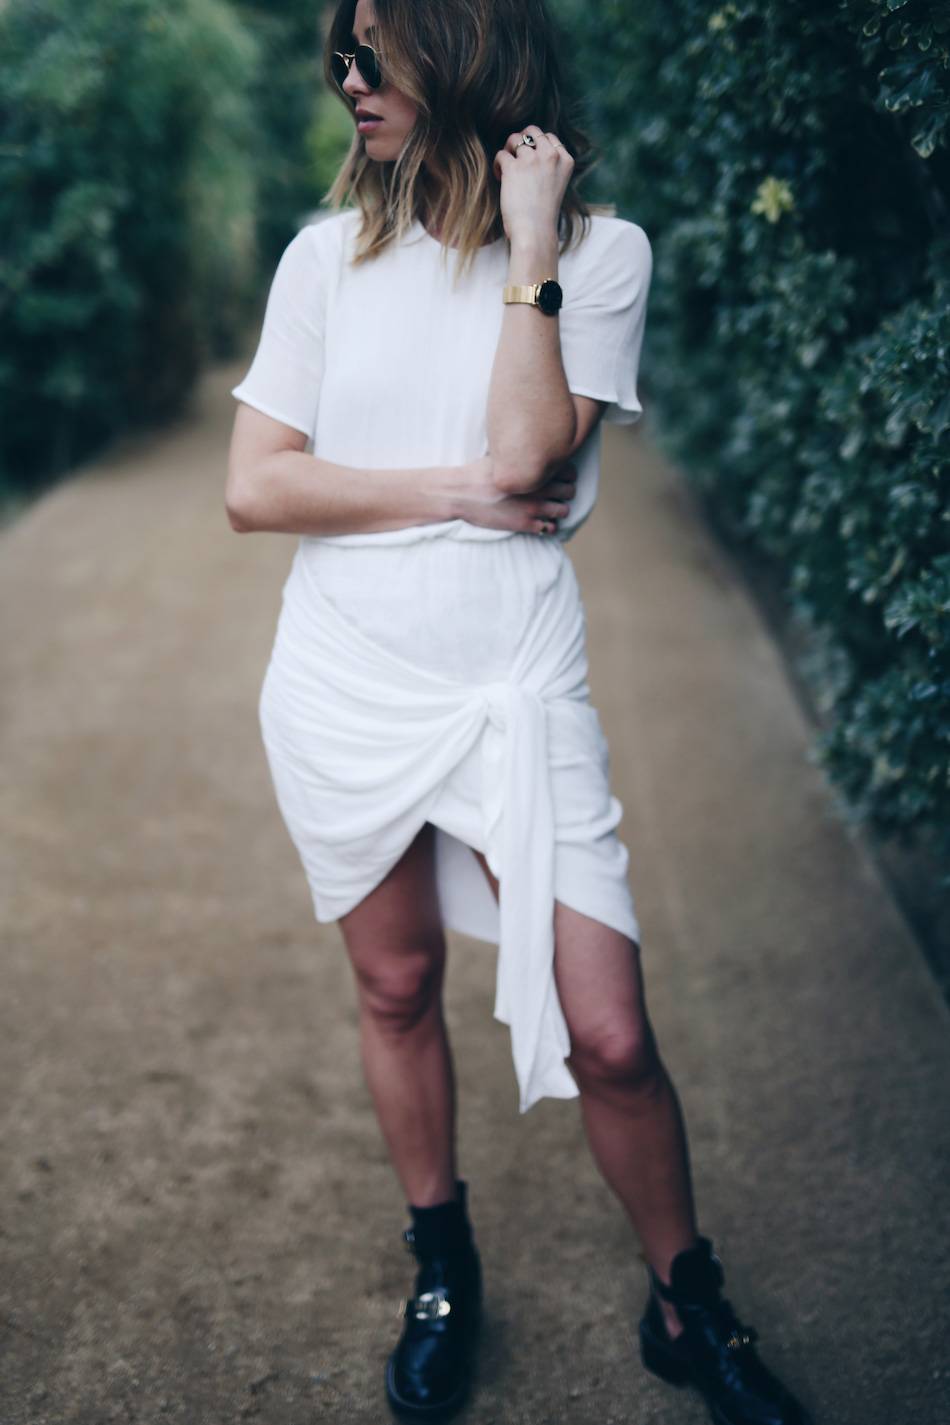 Style-and-beauty-blogger-Jill-Lansky-of-The-August-Diaries-in-white-wrap-Stylestalker-dress-Balenciaga-boots-what-to-wear-on-vacation